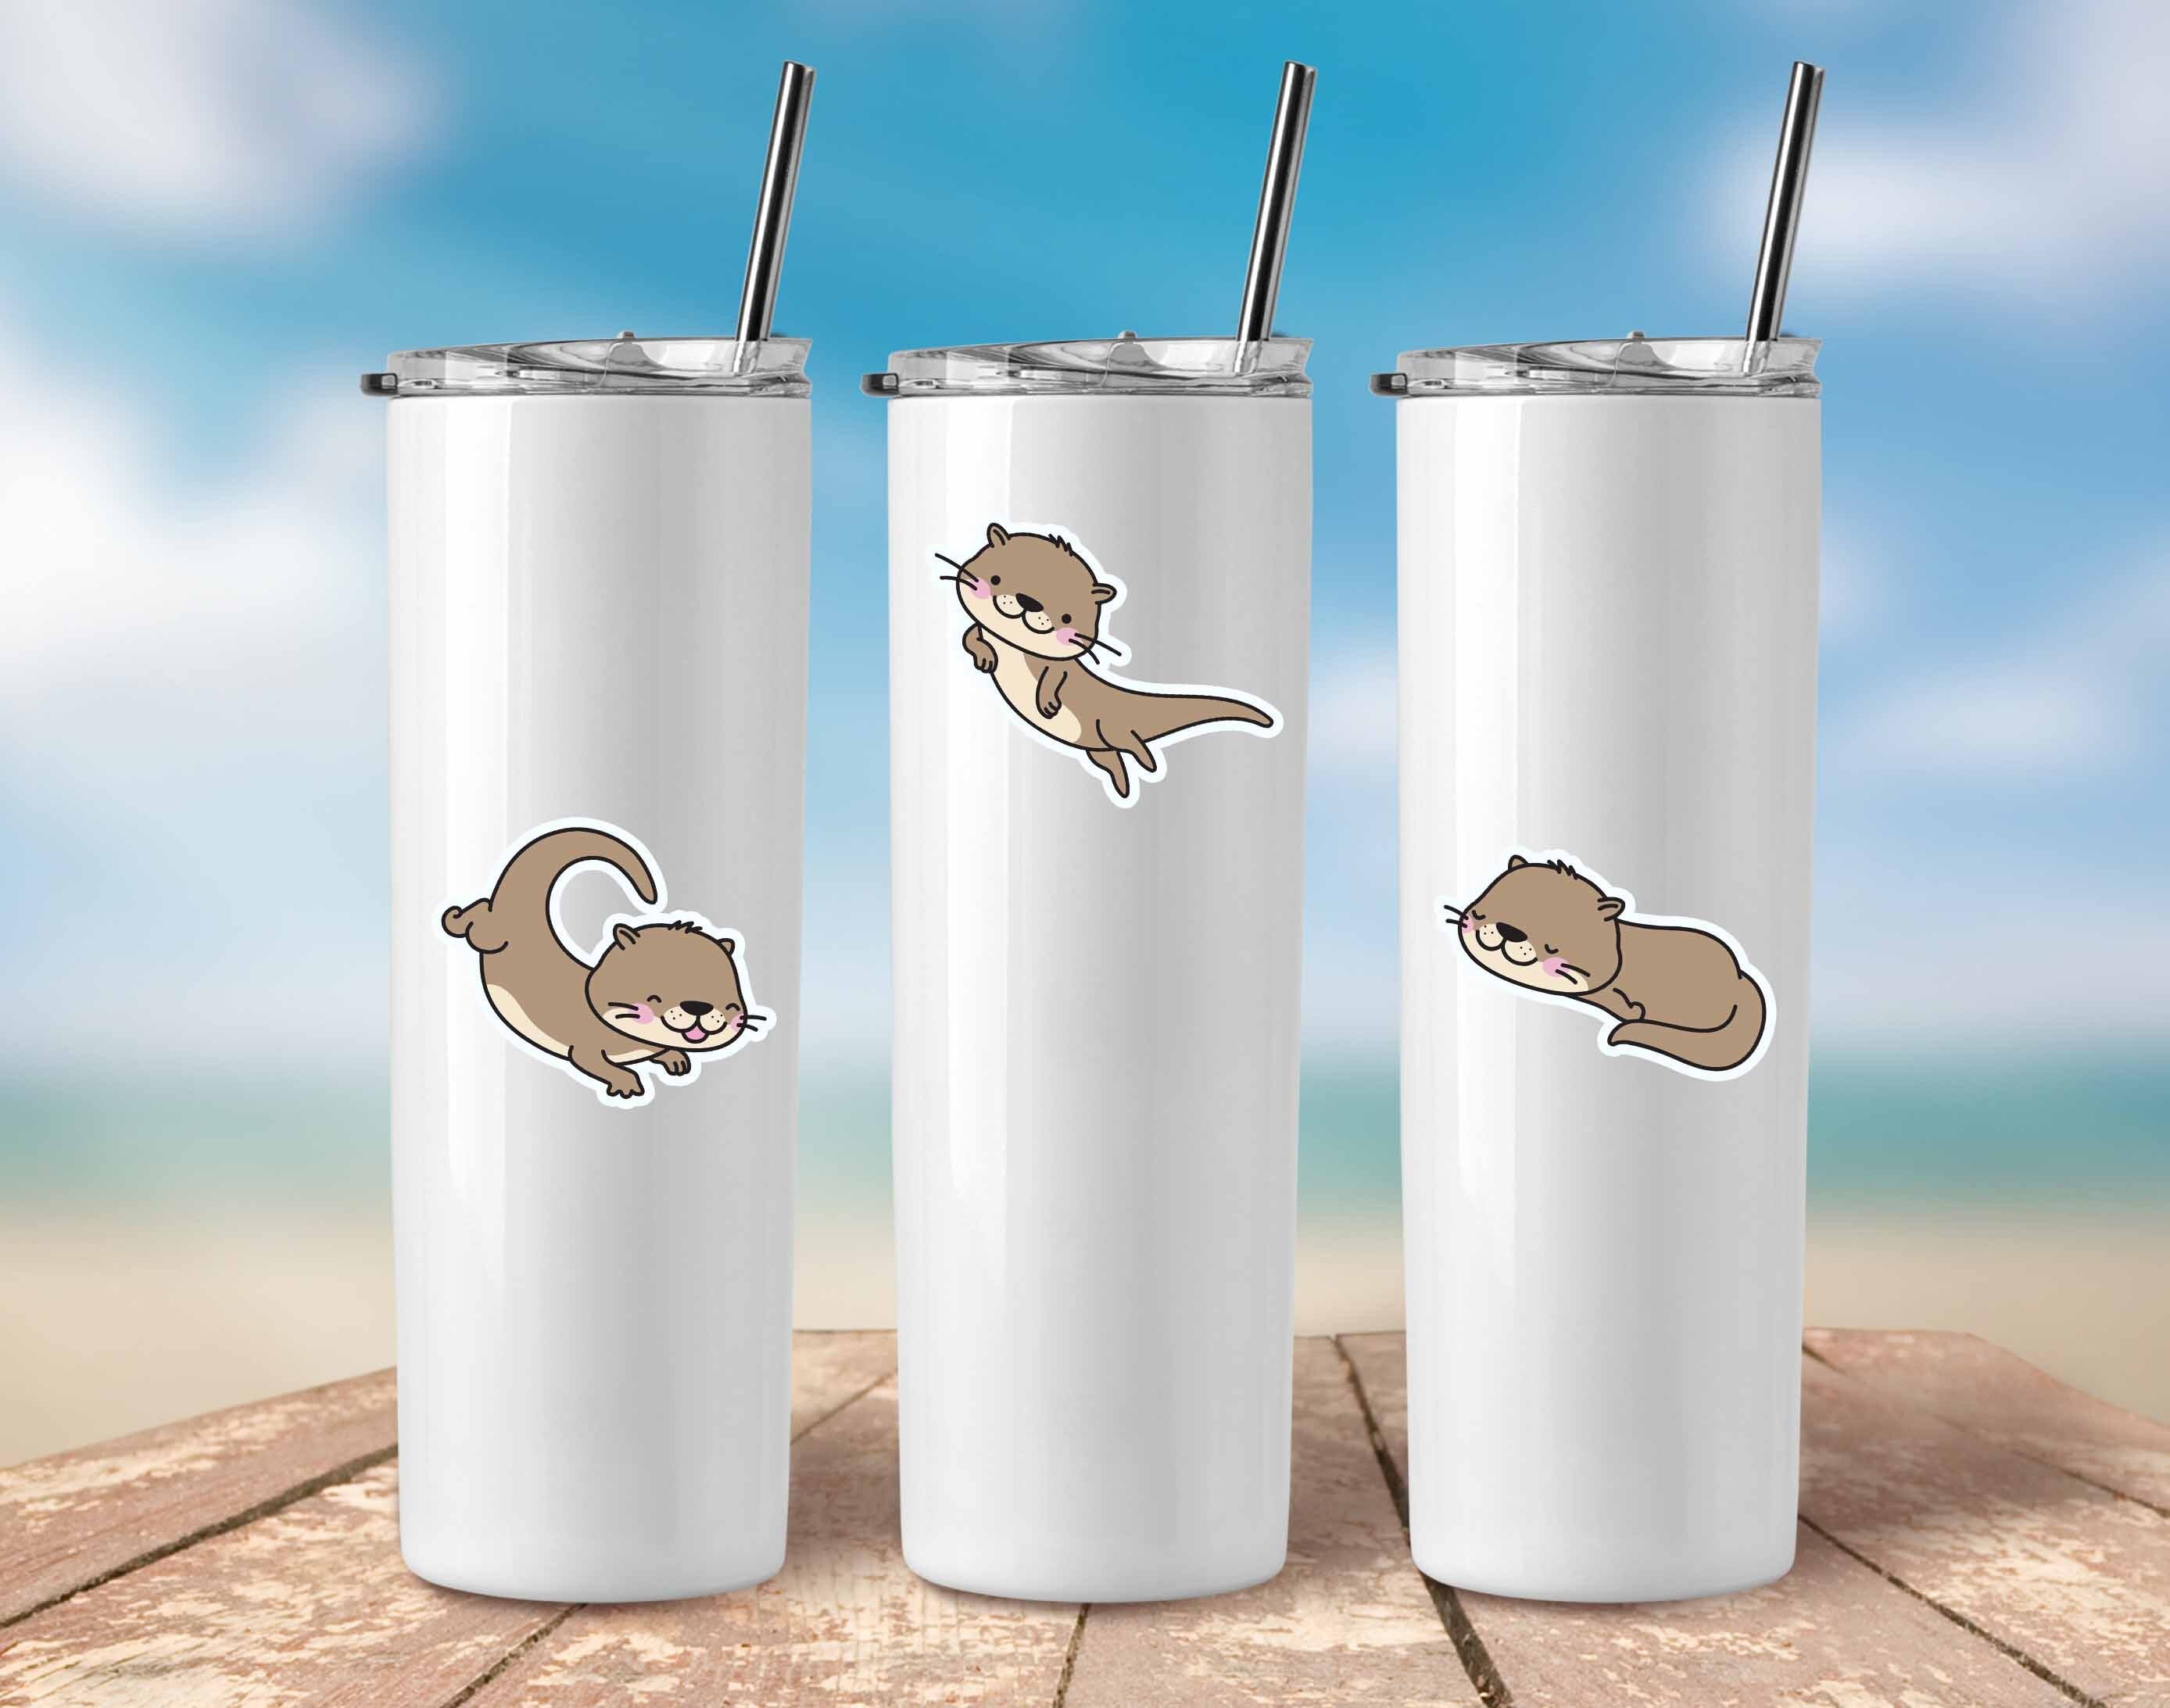 20 Pcs Adorable Otter Stickers - Perfect for Animal Lovers and Enthusiasts!